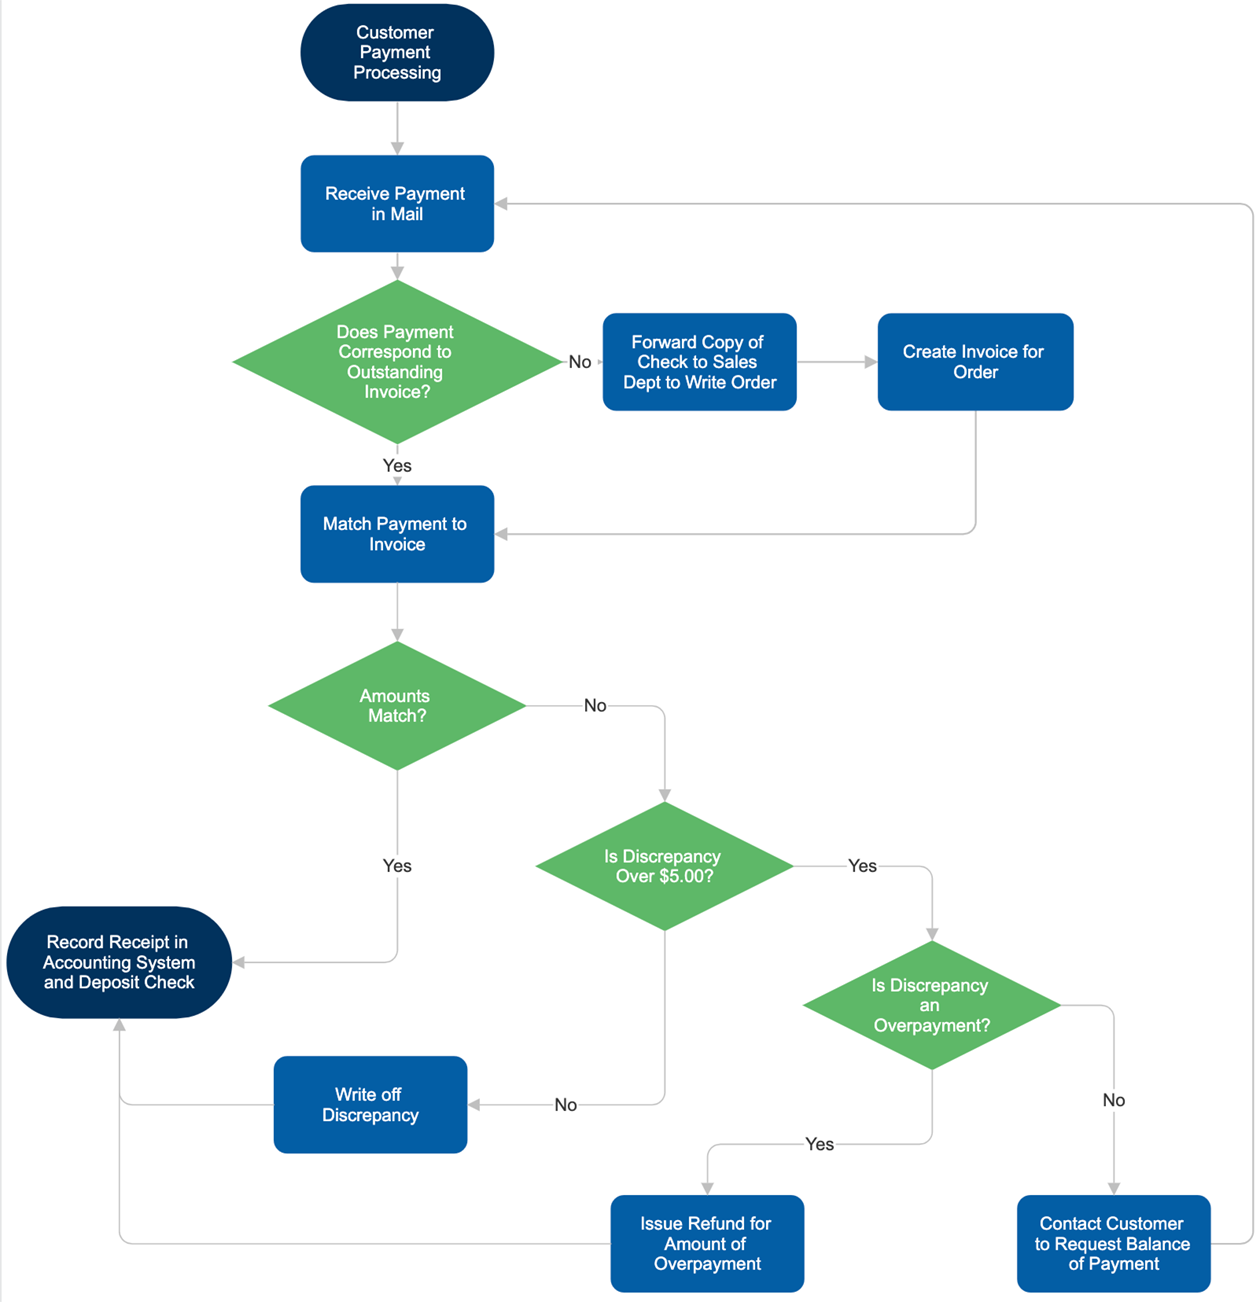 How to Make a Flowchart - Create a Flowchart with the Help of this ...